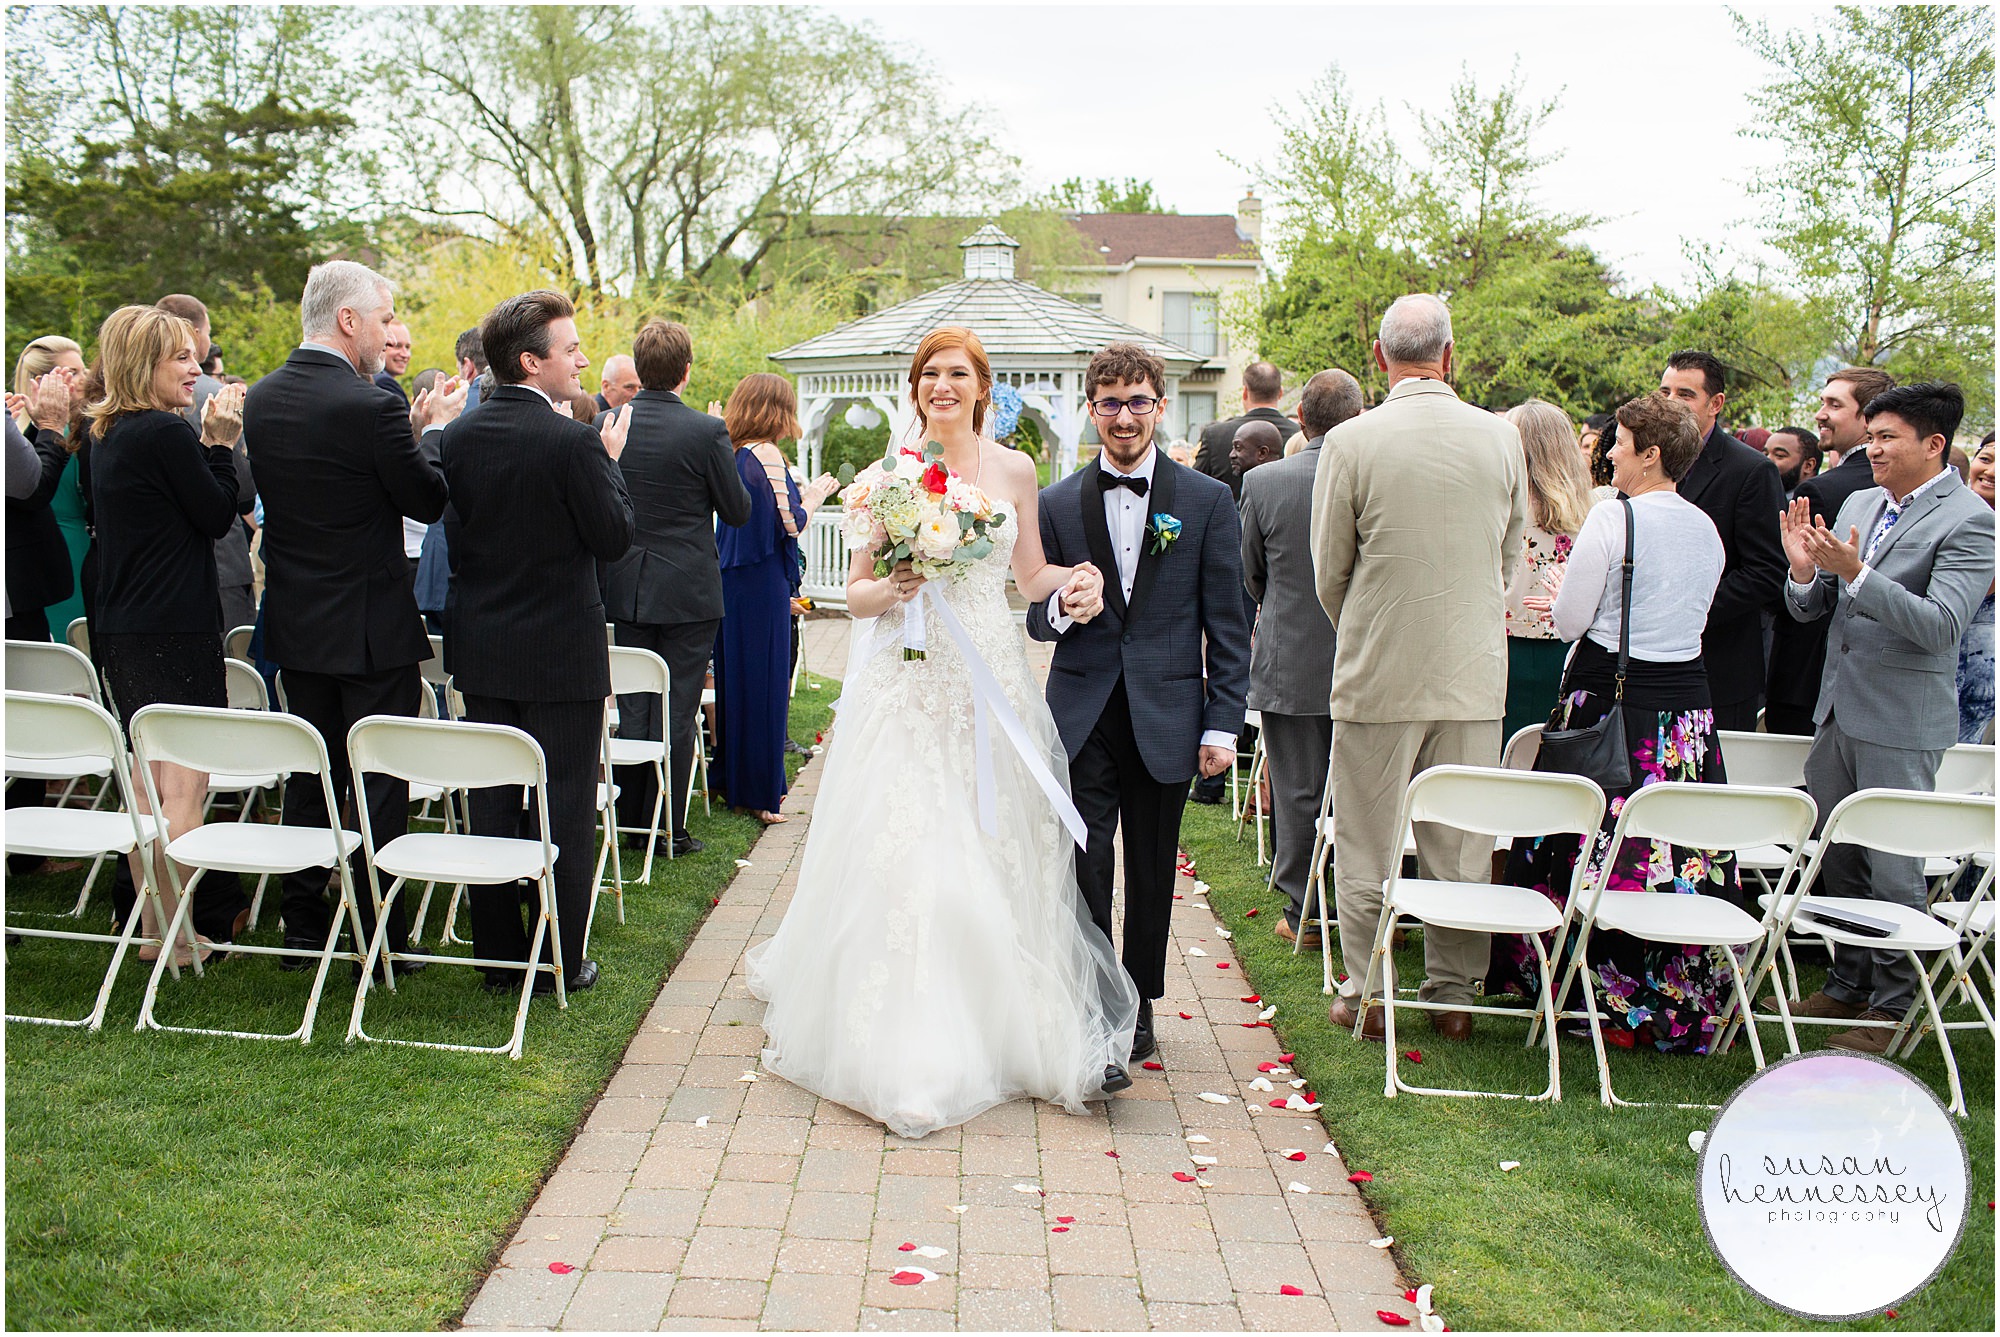 Bride and groom say "I do" at Greate Bay Country Club